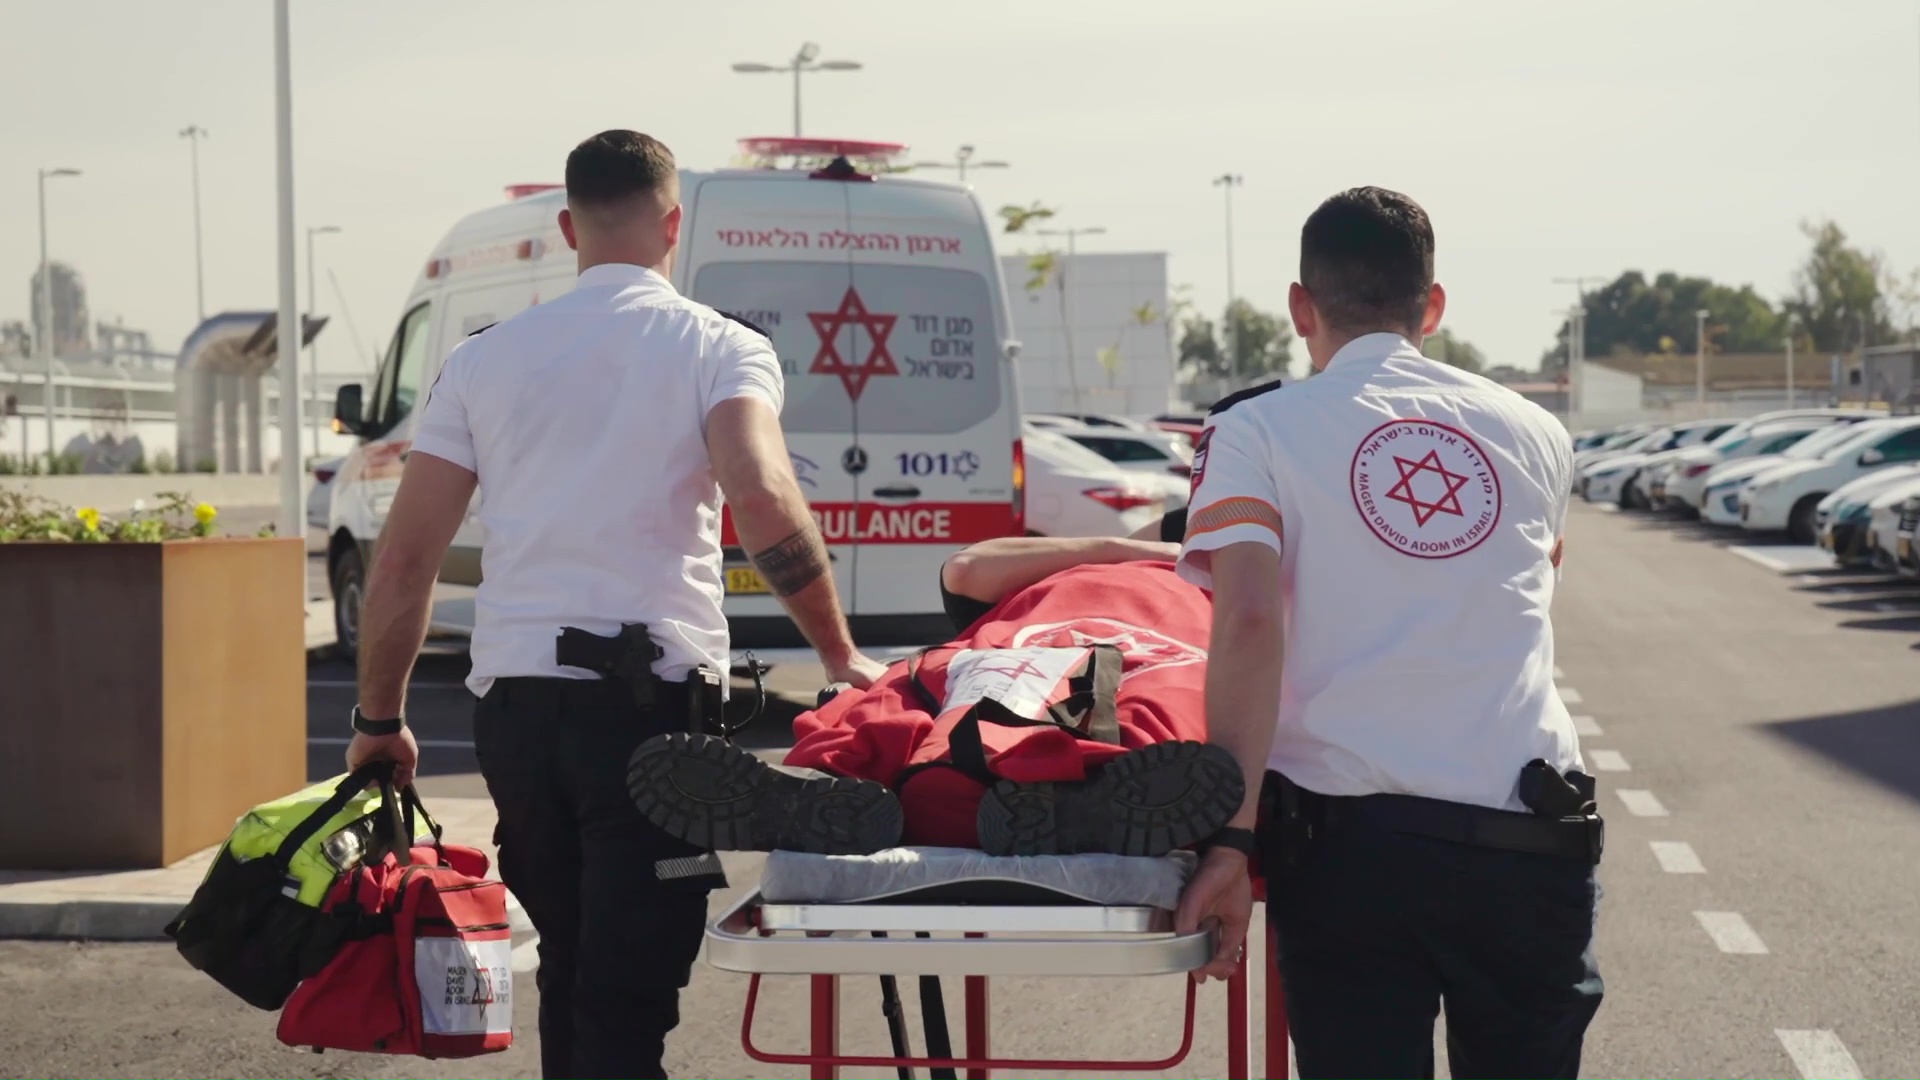 Franklin Graham met with leaders in Israel to dedicate 14 new ambulances provided by Samaritan’s Purse for the use of Magen David Adom